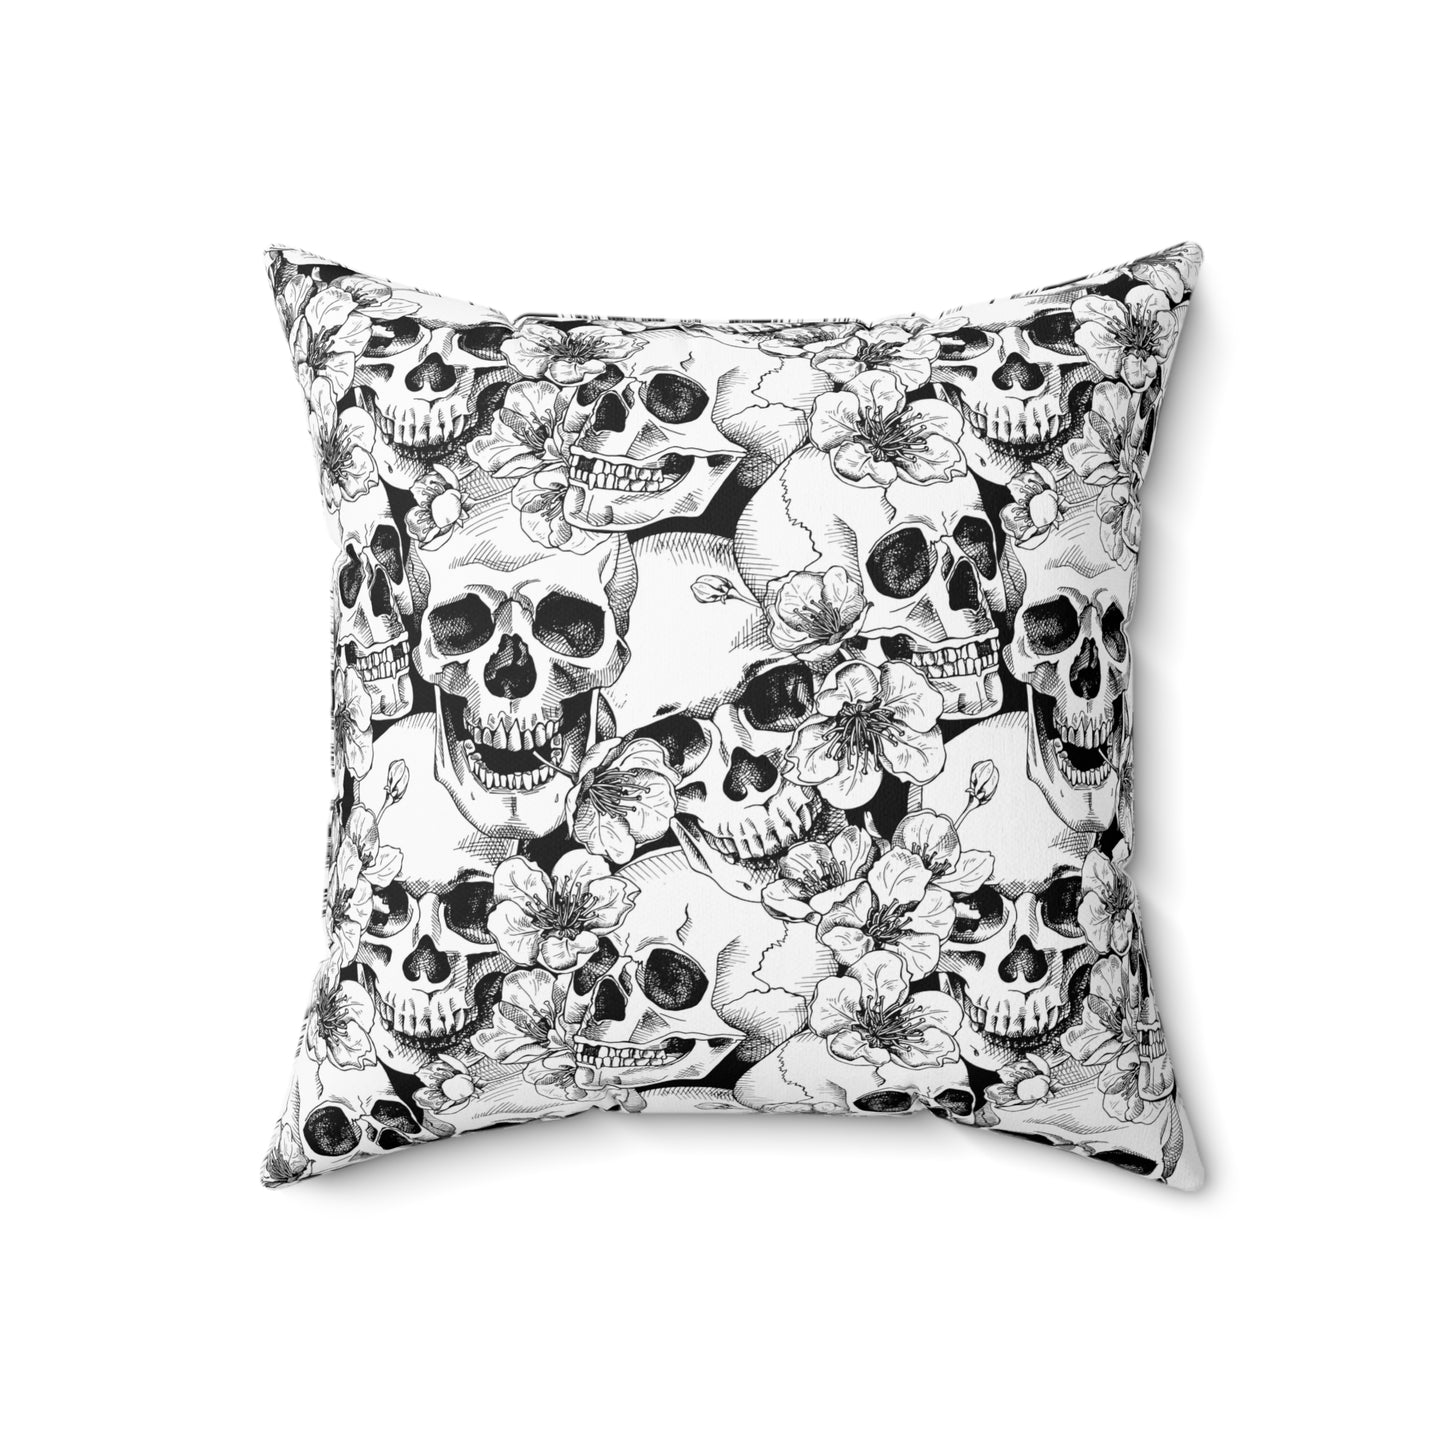 Skulls and Flowers Spun Polyester Square Pillow with Insert